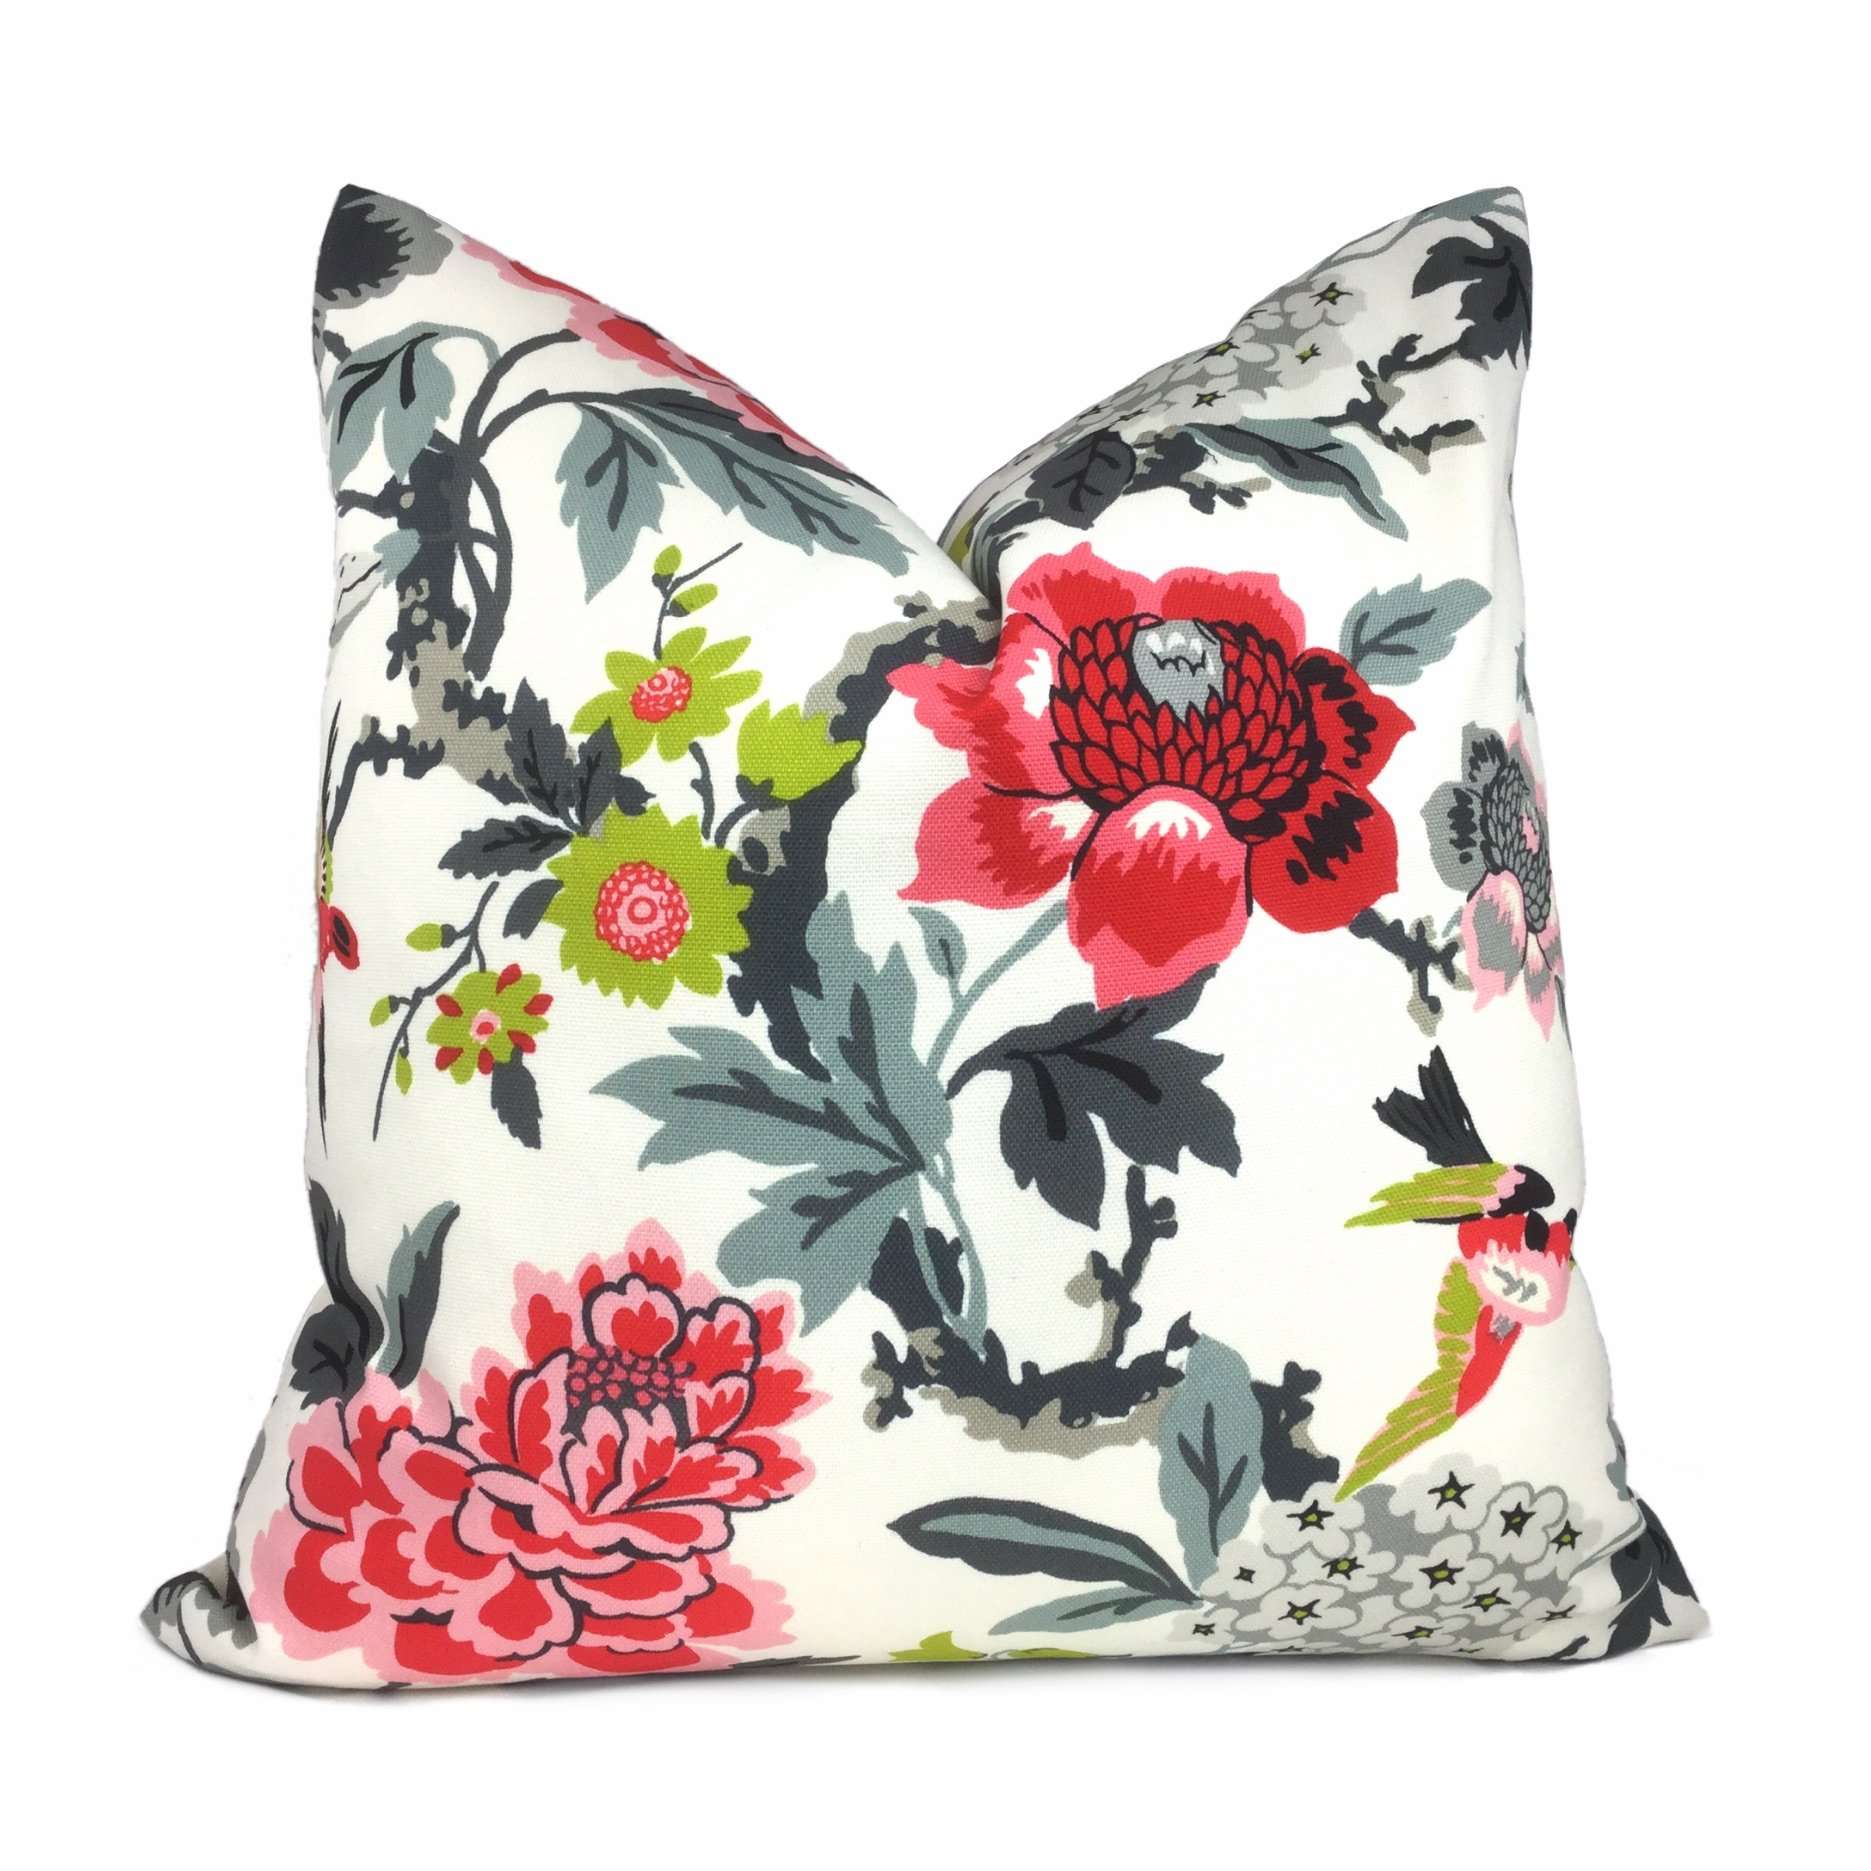 https://cdn.shopify.com/s/files/1/0936/5222/products/pink-gray-cream-floral-birds-cotton-print-pillow-cover-by-aloriam-13566389.jpg?v=1571439468